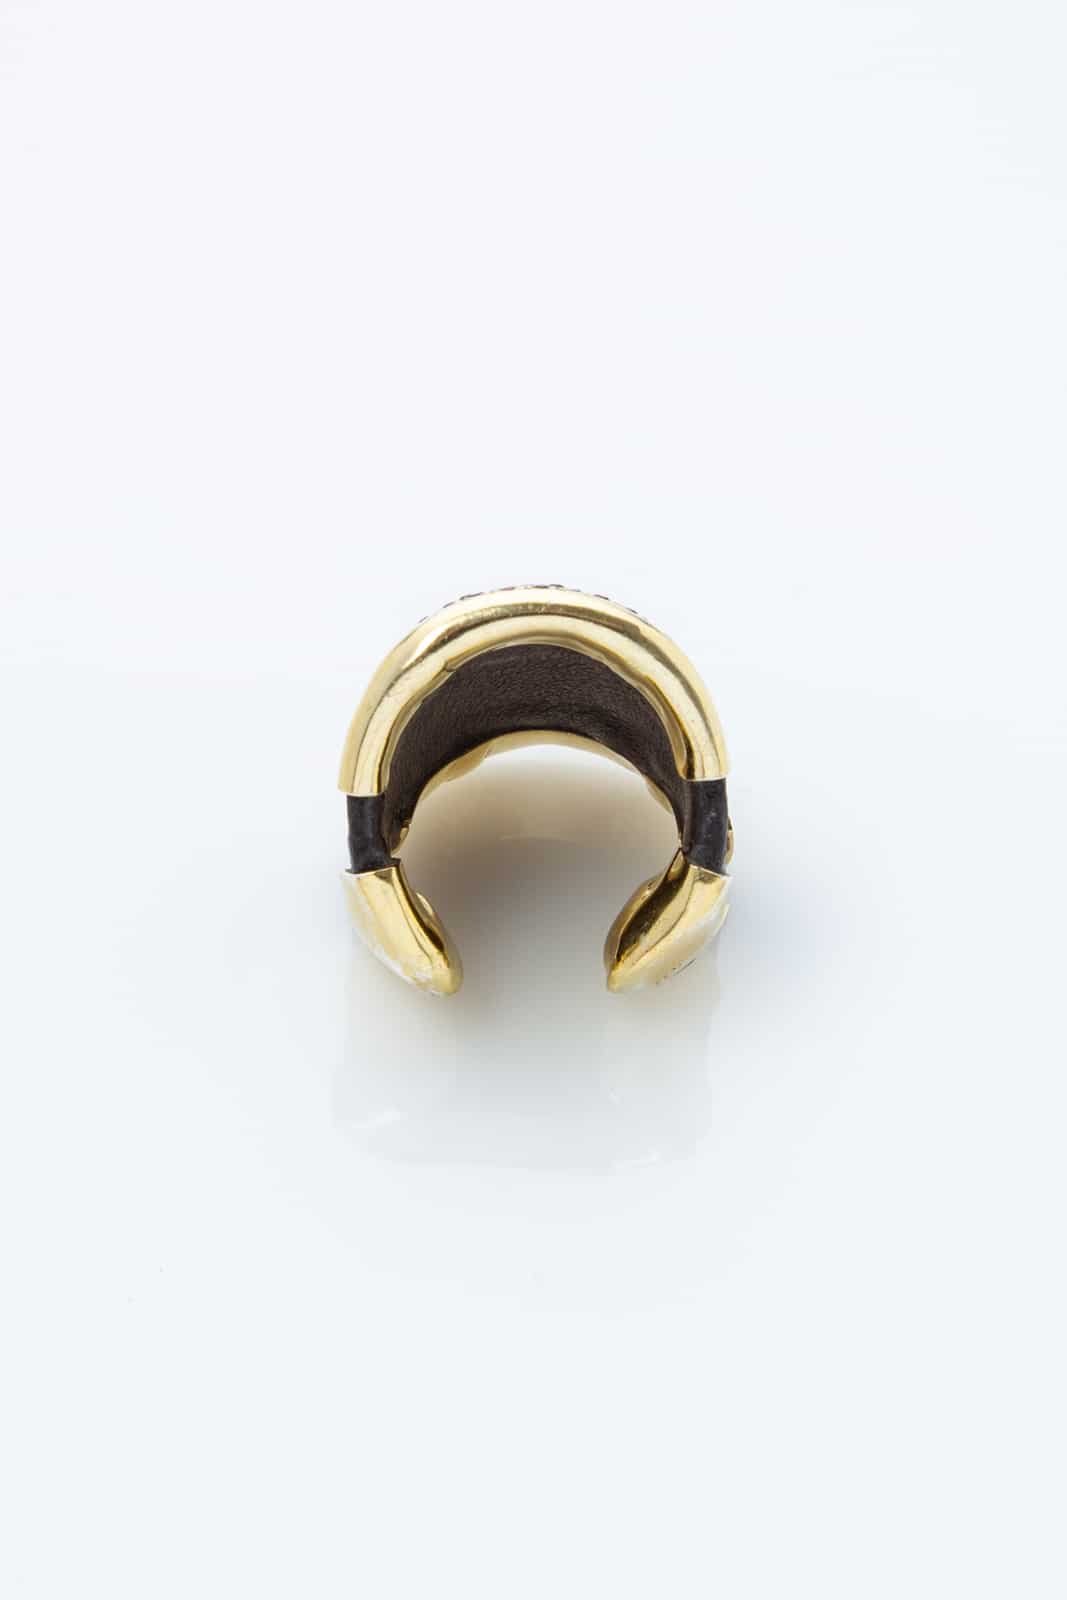 LEATHER GOLD RING BLACK